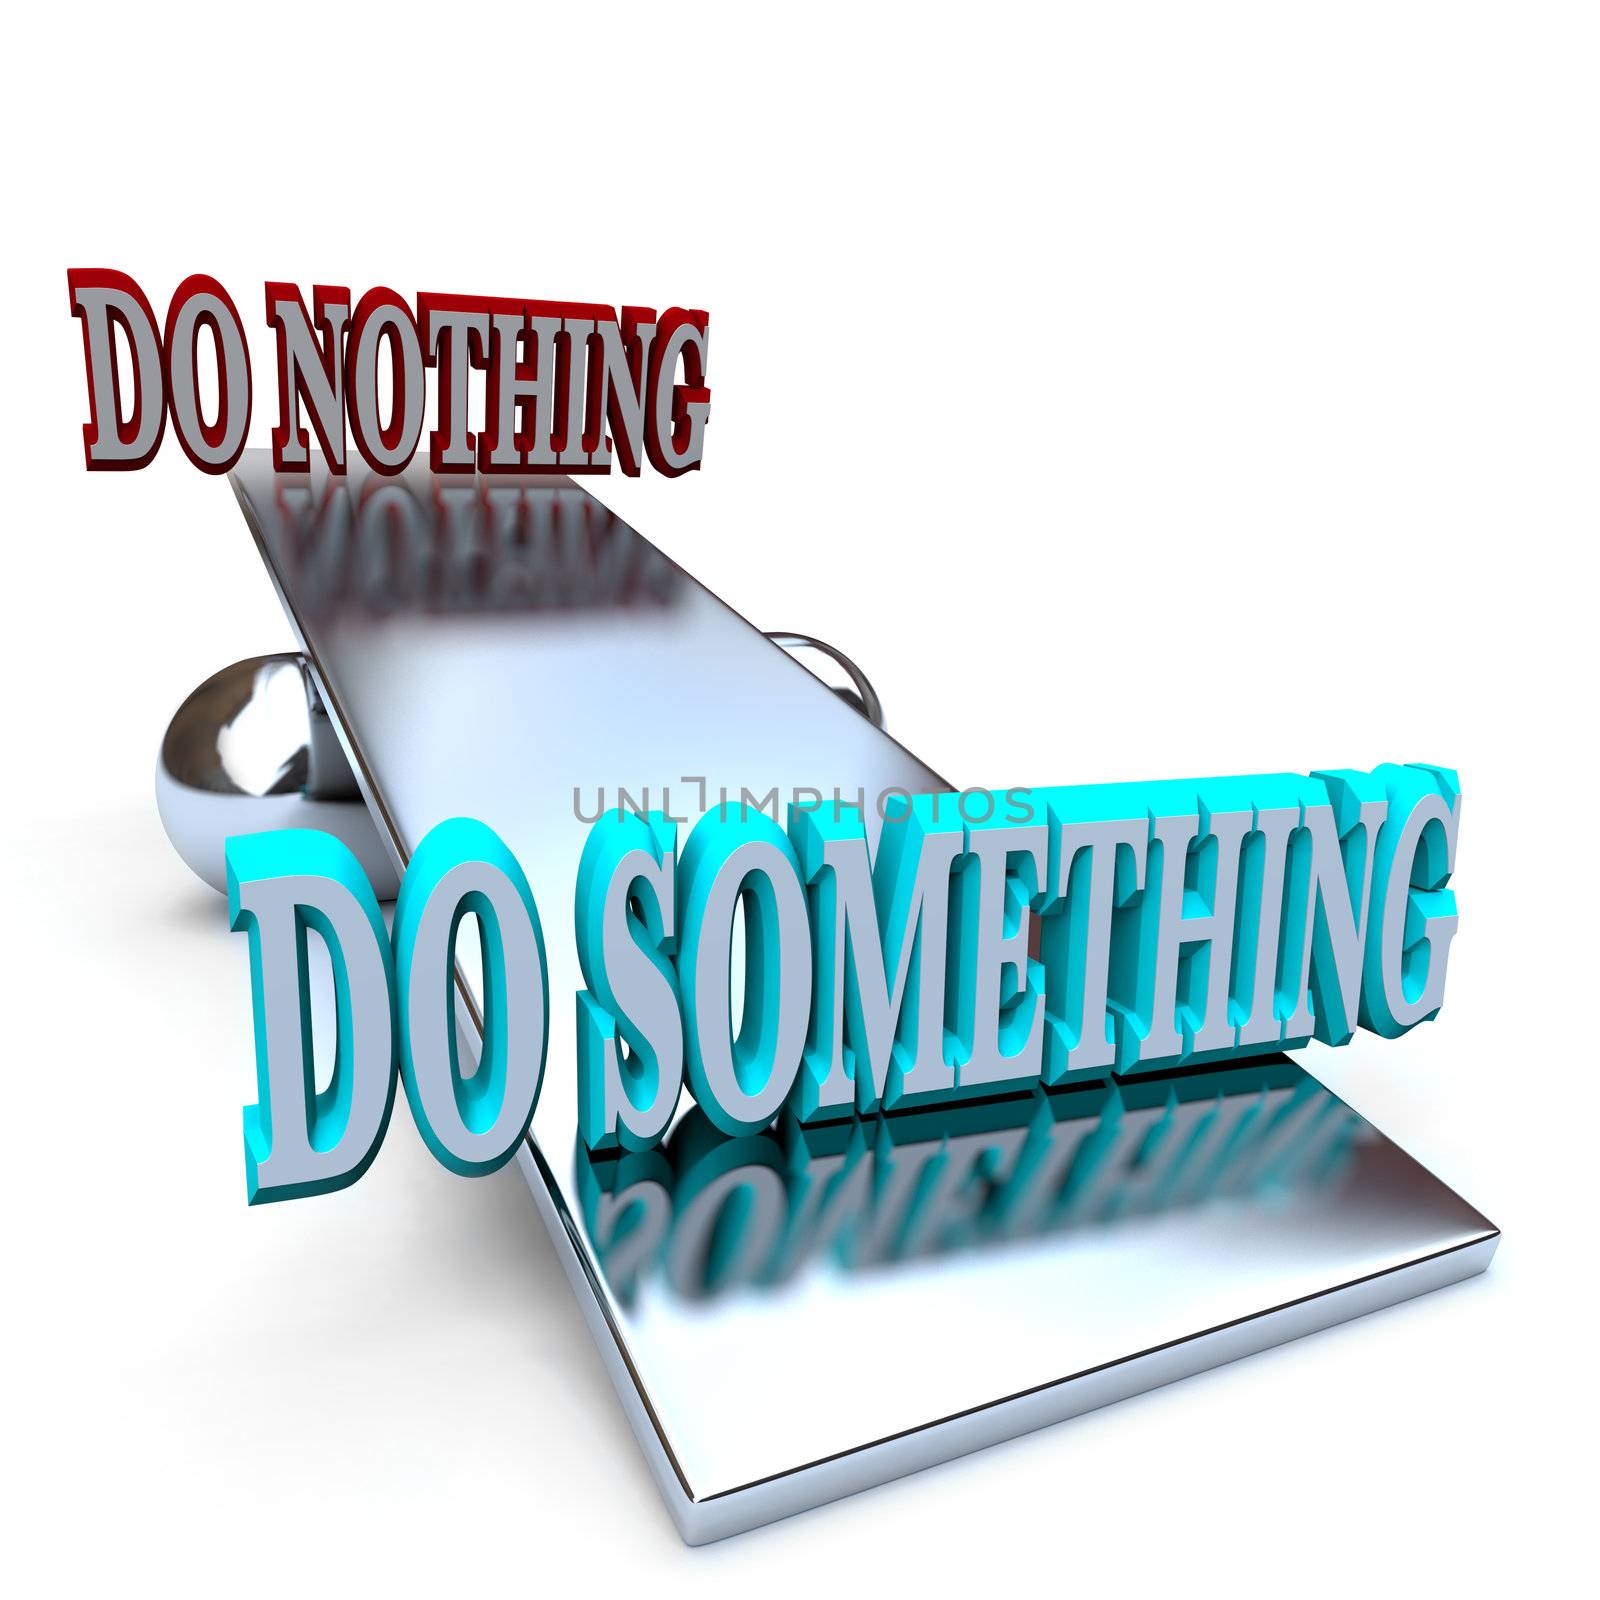 Do Something vs Doing Nothing - Taking a Stand by iQoncept